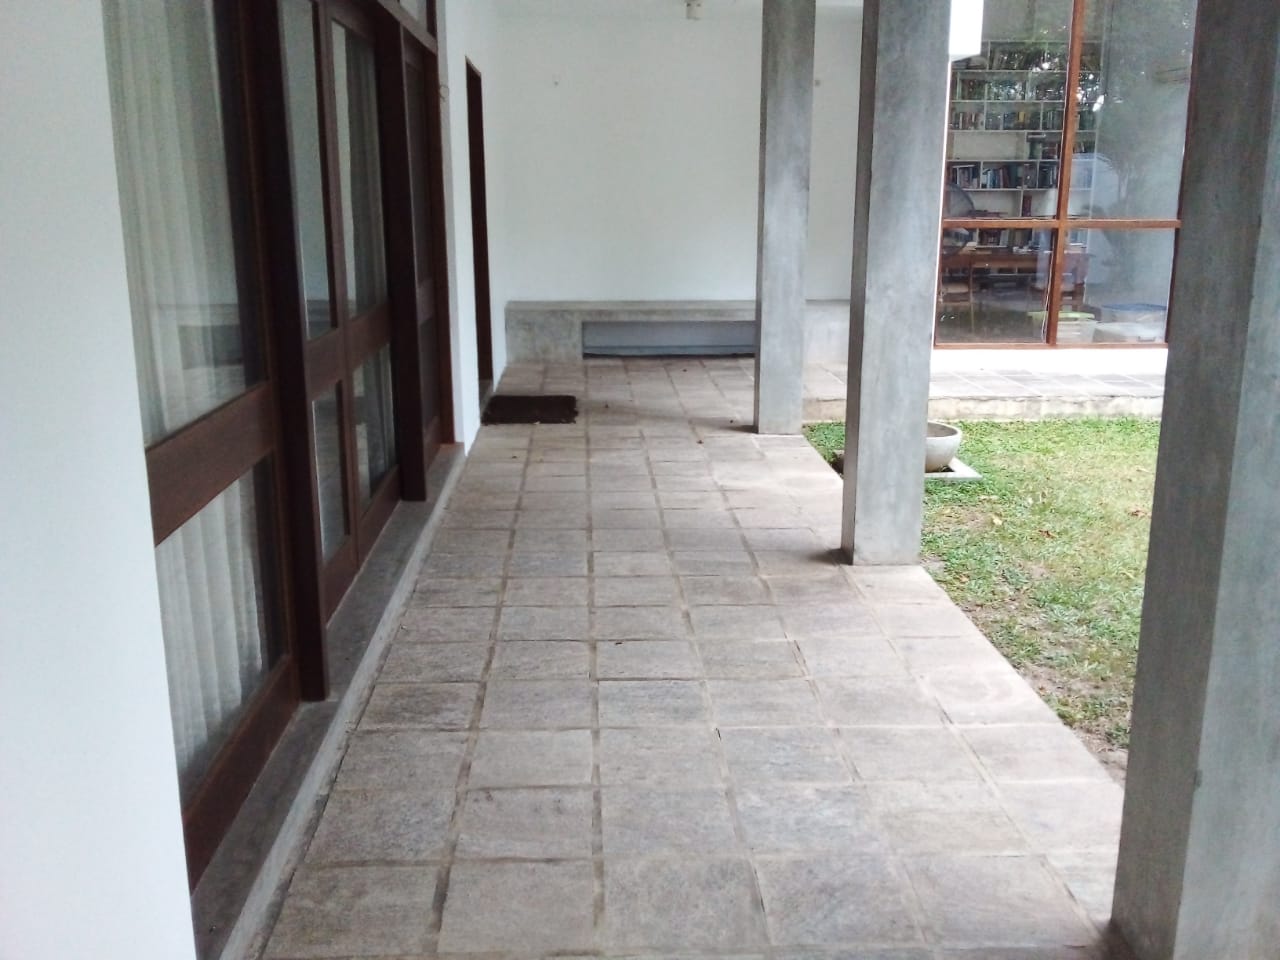 Fully furnished house for rent in Colombo 08 - 4 Bedrooms - 600,000 per Month